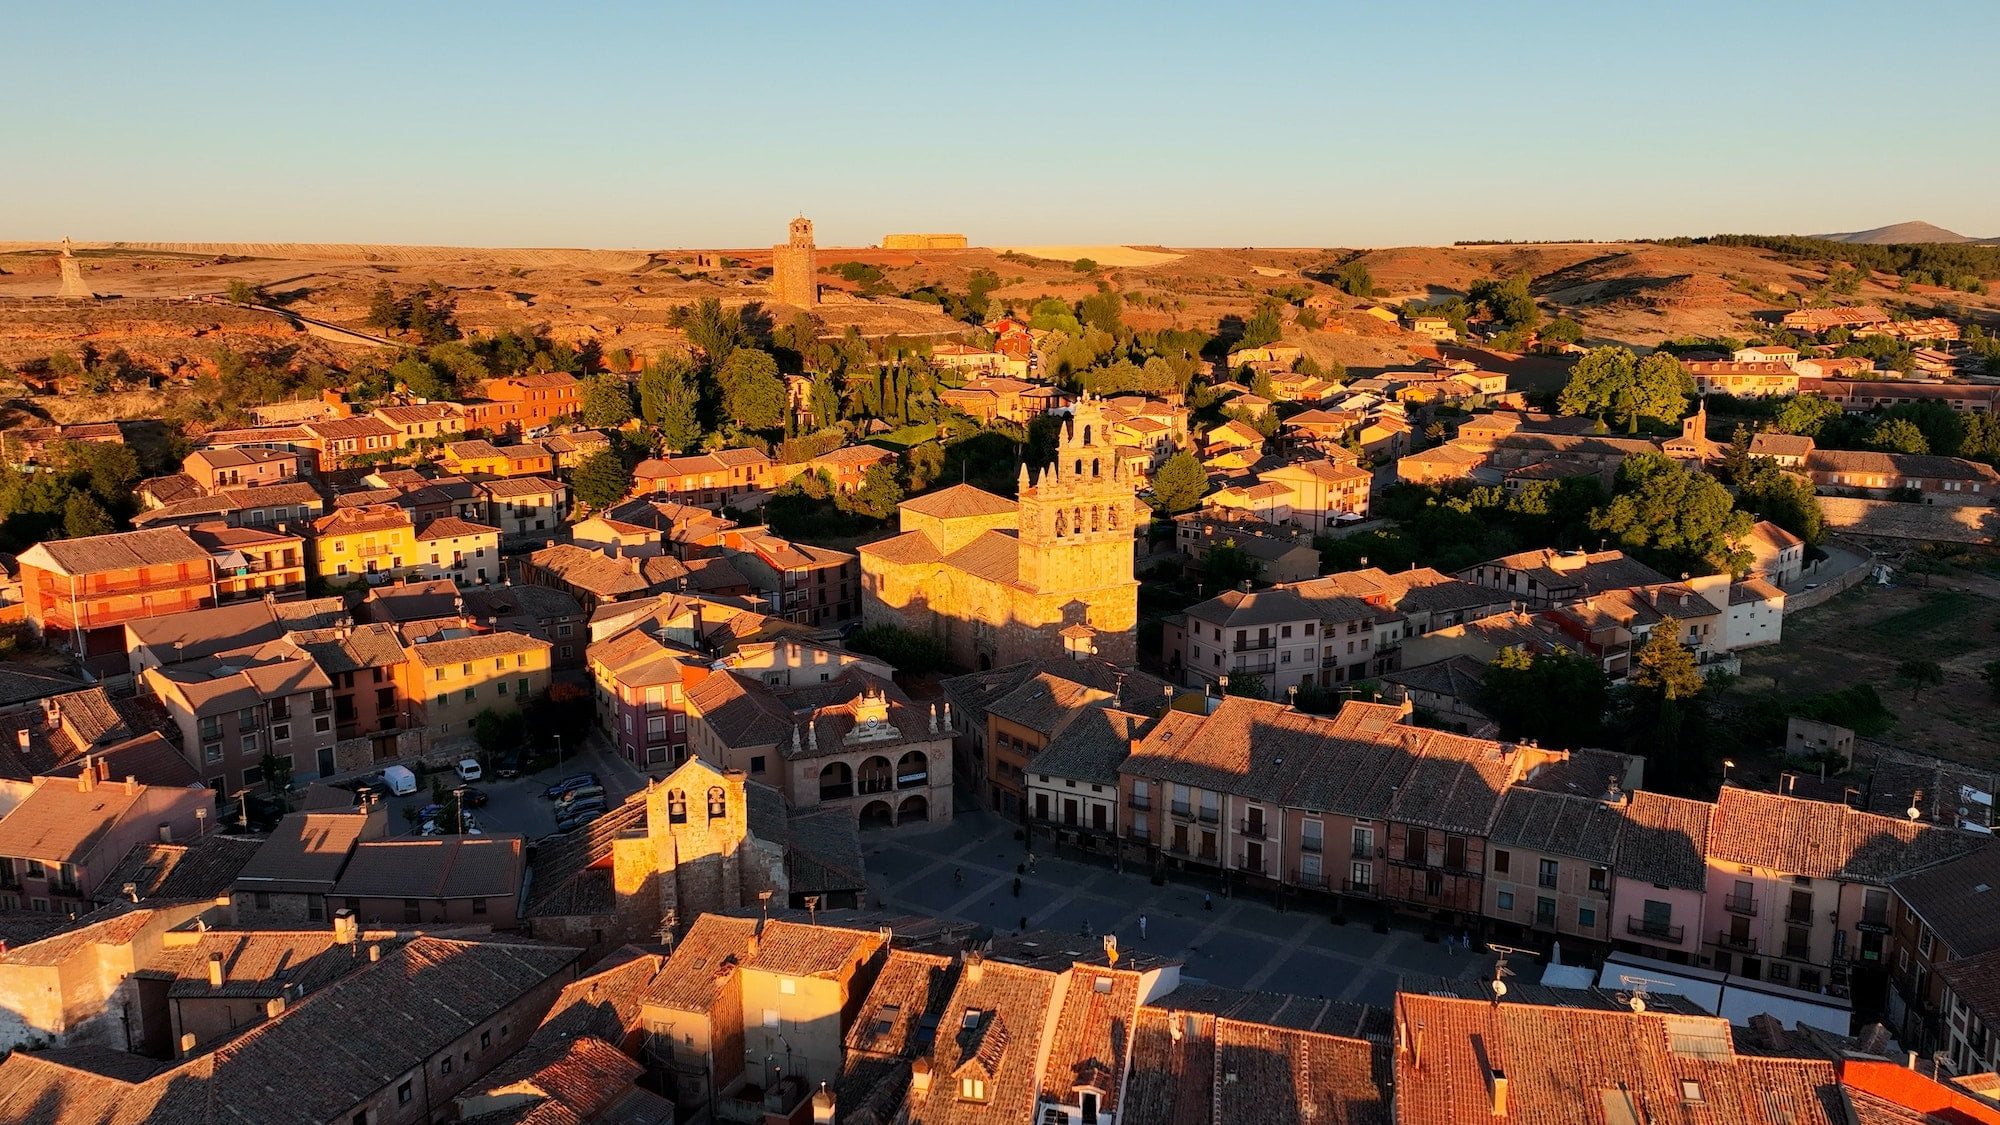 Aerial view of Ayllon medieval town in the province of Segovia, Castile and Leon, Spain